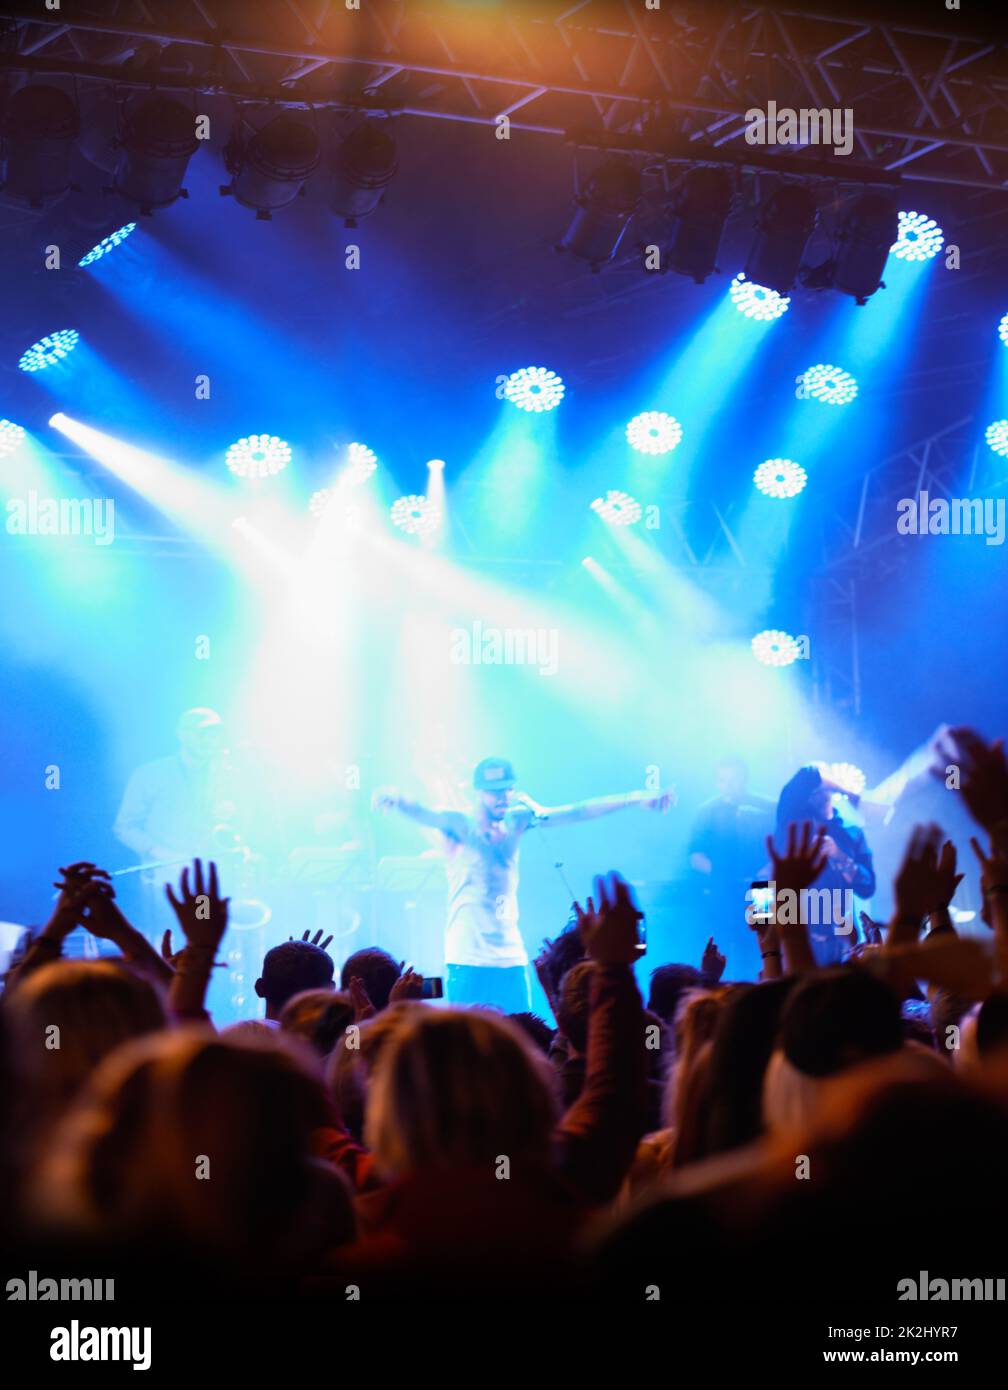 Praising the party people. Rearview of an audience with hands raised at a music festival and lights streaming down from above the stage. Stock Photo